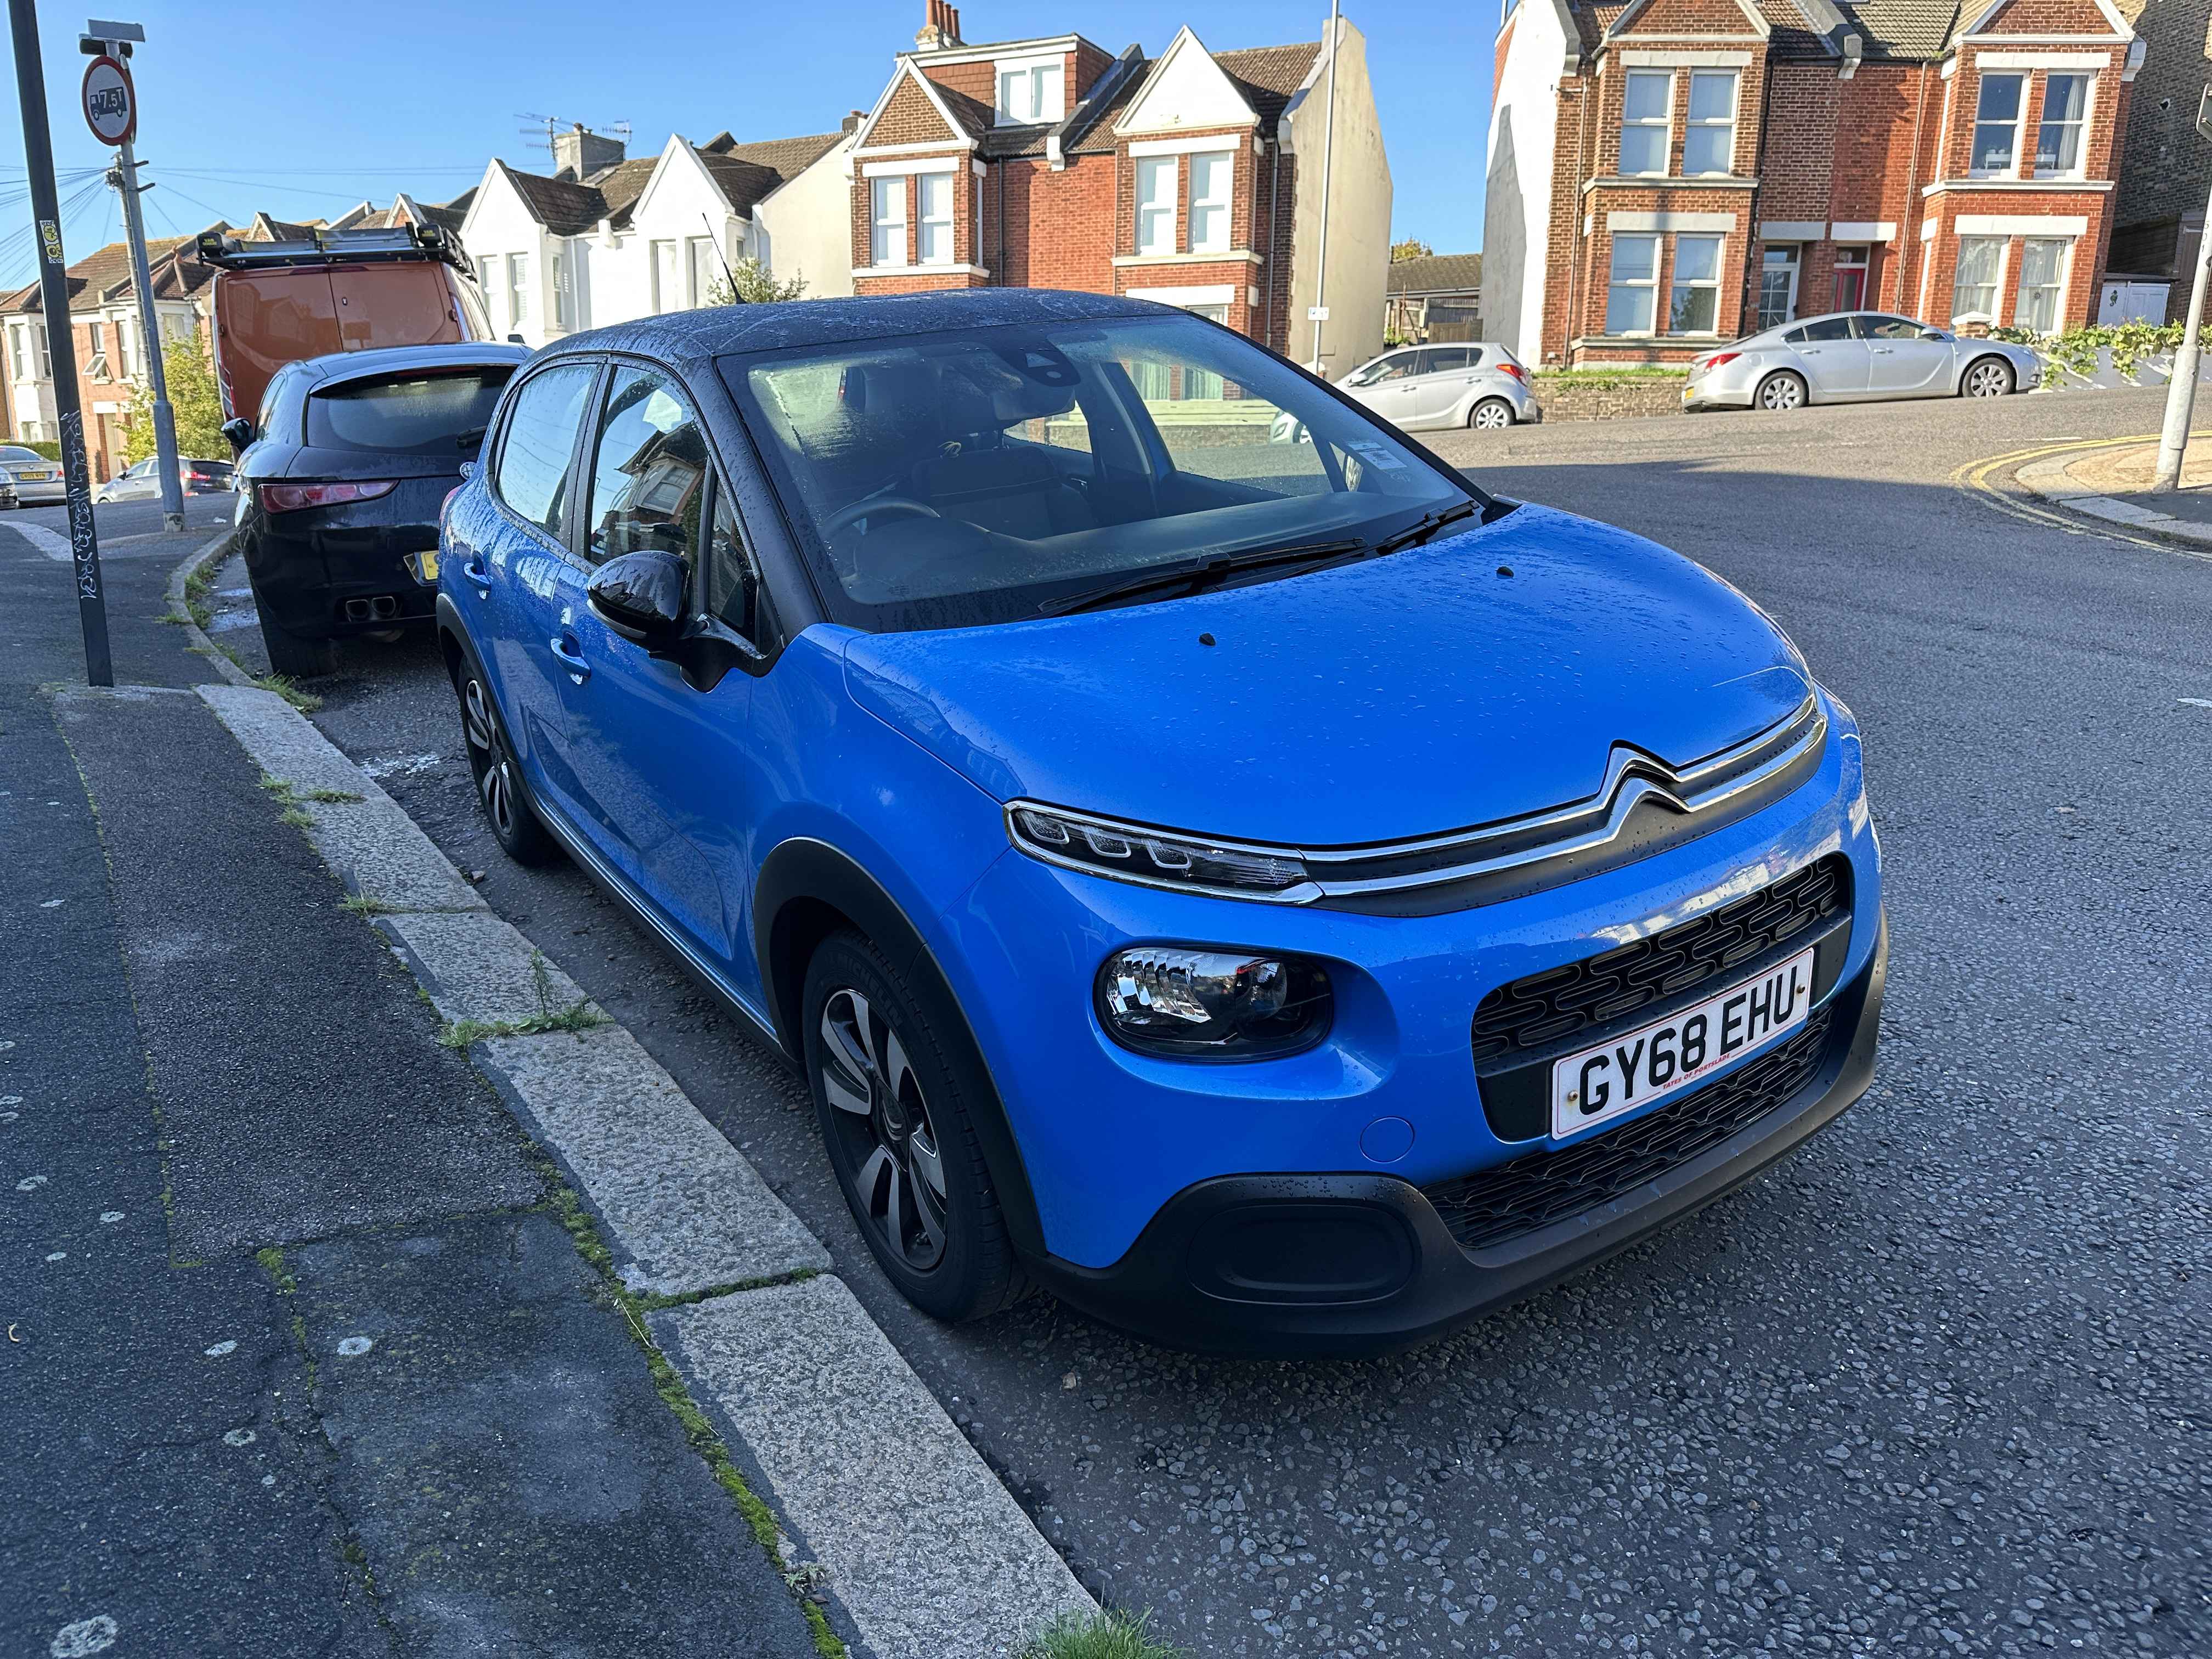 Photograph of GY68 EHU - a Blue Citroen C3 parked in Hollingdean by a non-resident who uses the local area as part of their Brighton commute. The fourth of twelve photographs supplied by the residents of Hollingdean.